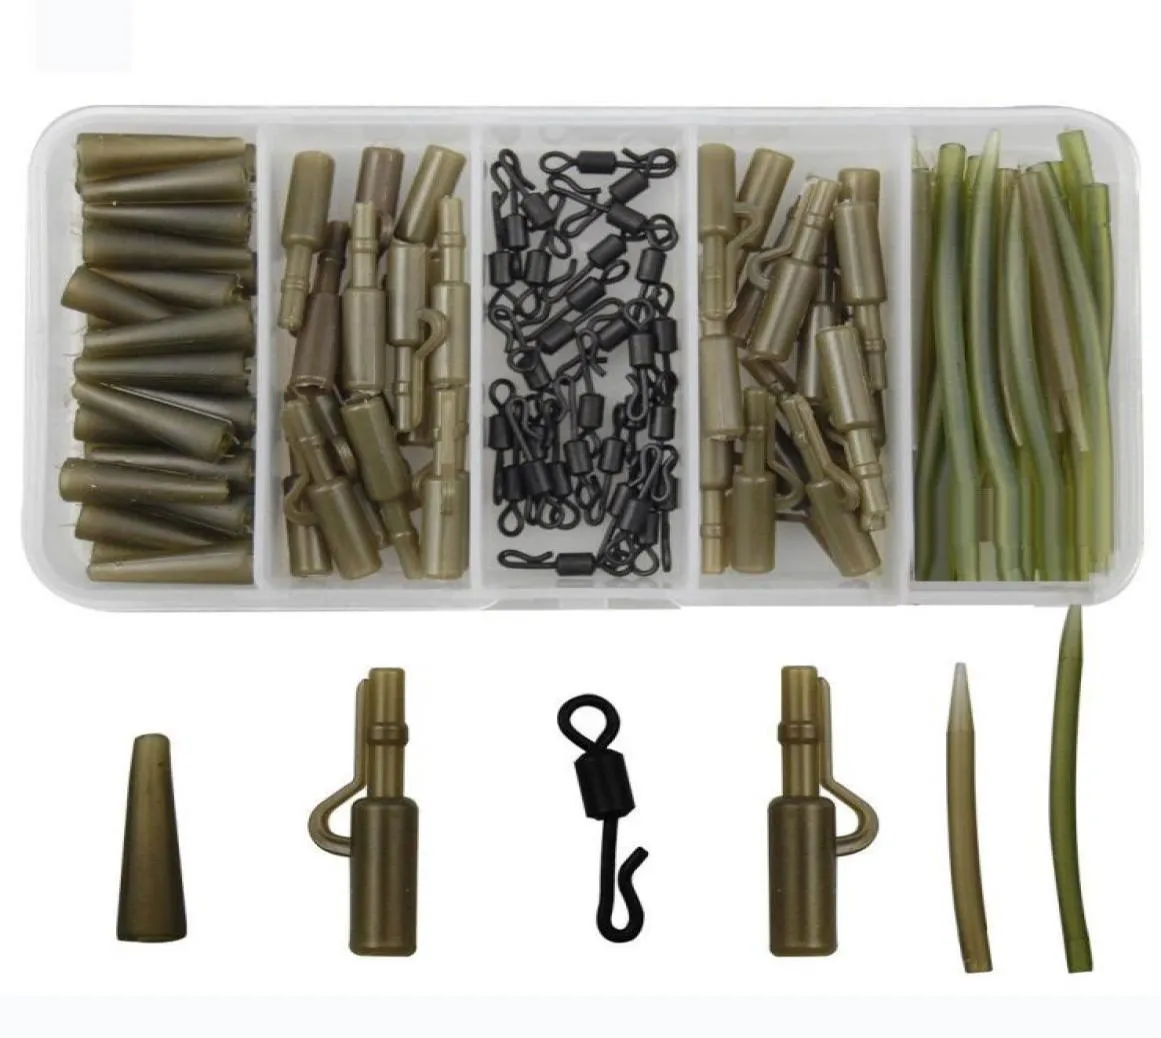 120pcs Carp Fishing Tackle Accessories Carp Rigs Tackle Safety Lead Clips Quick Swivel AntiTangle Sleeve Kit3448173